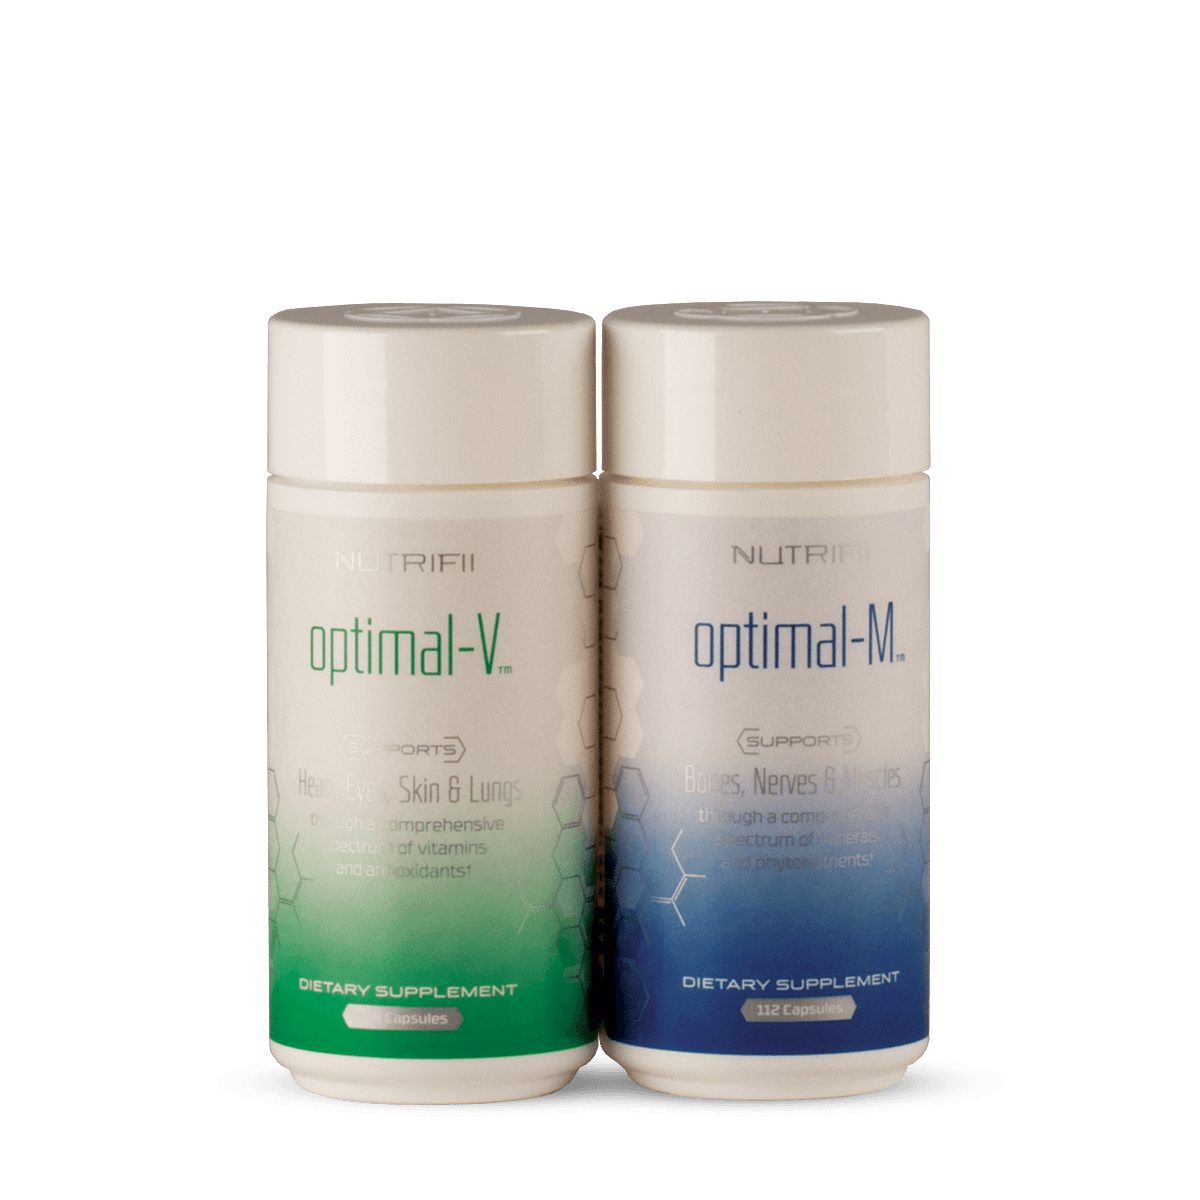 Optimals By Nutrifii: What Are Their Effects?